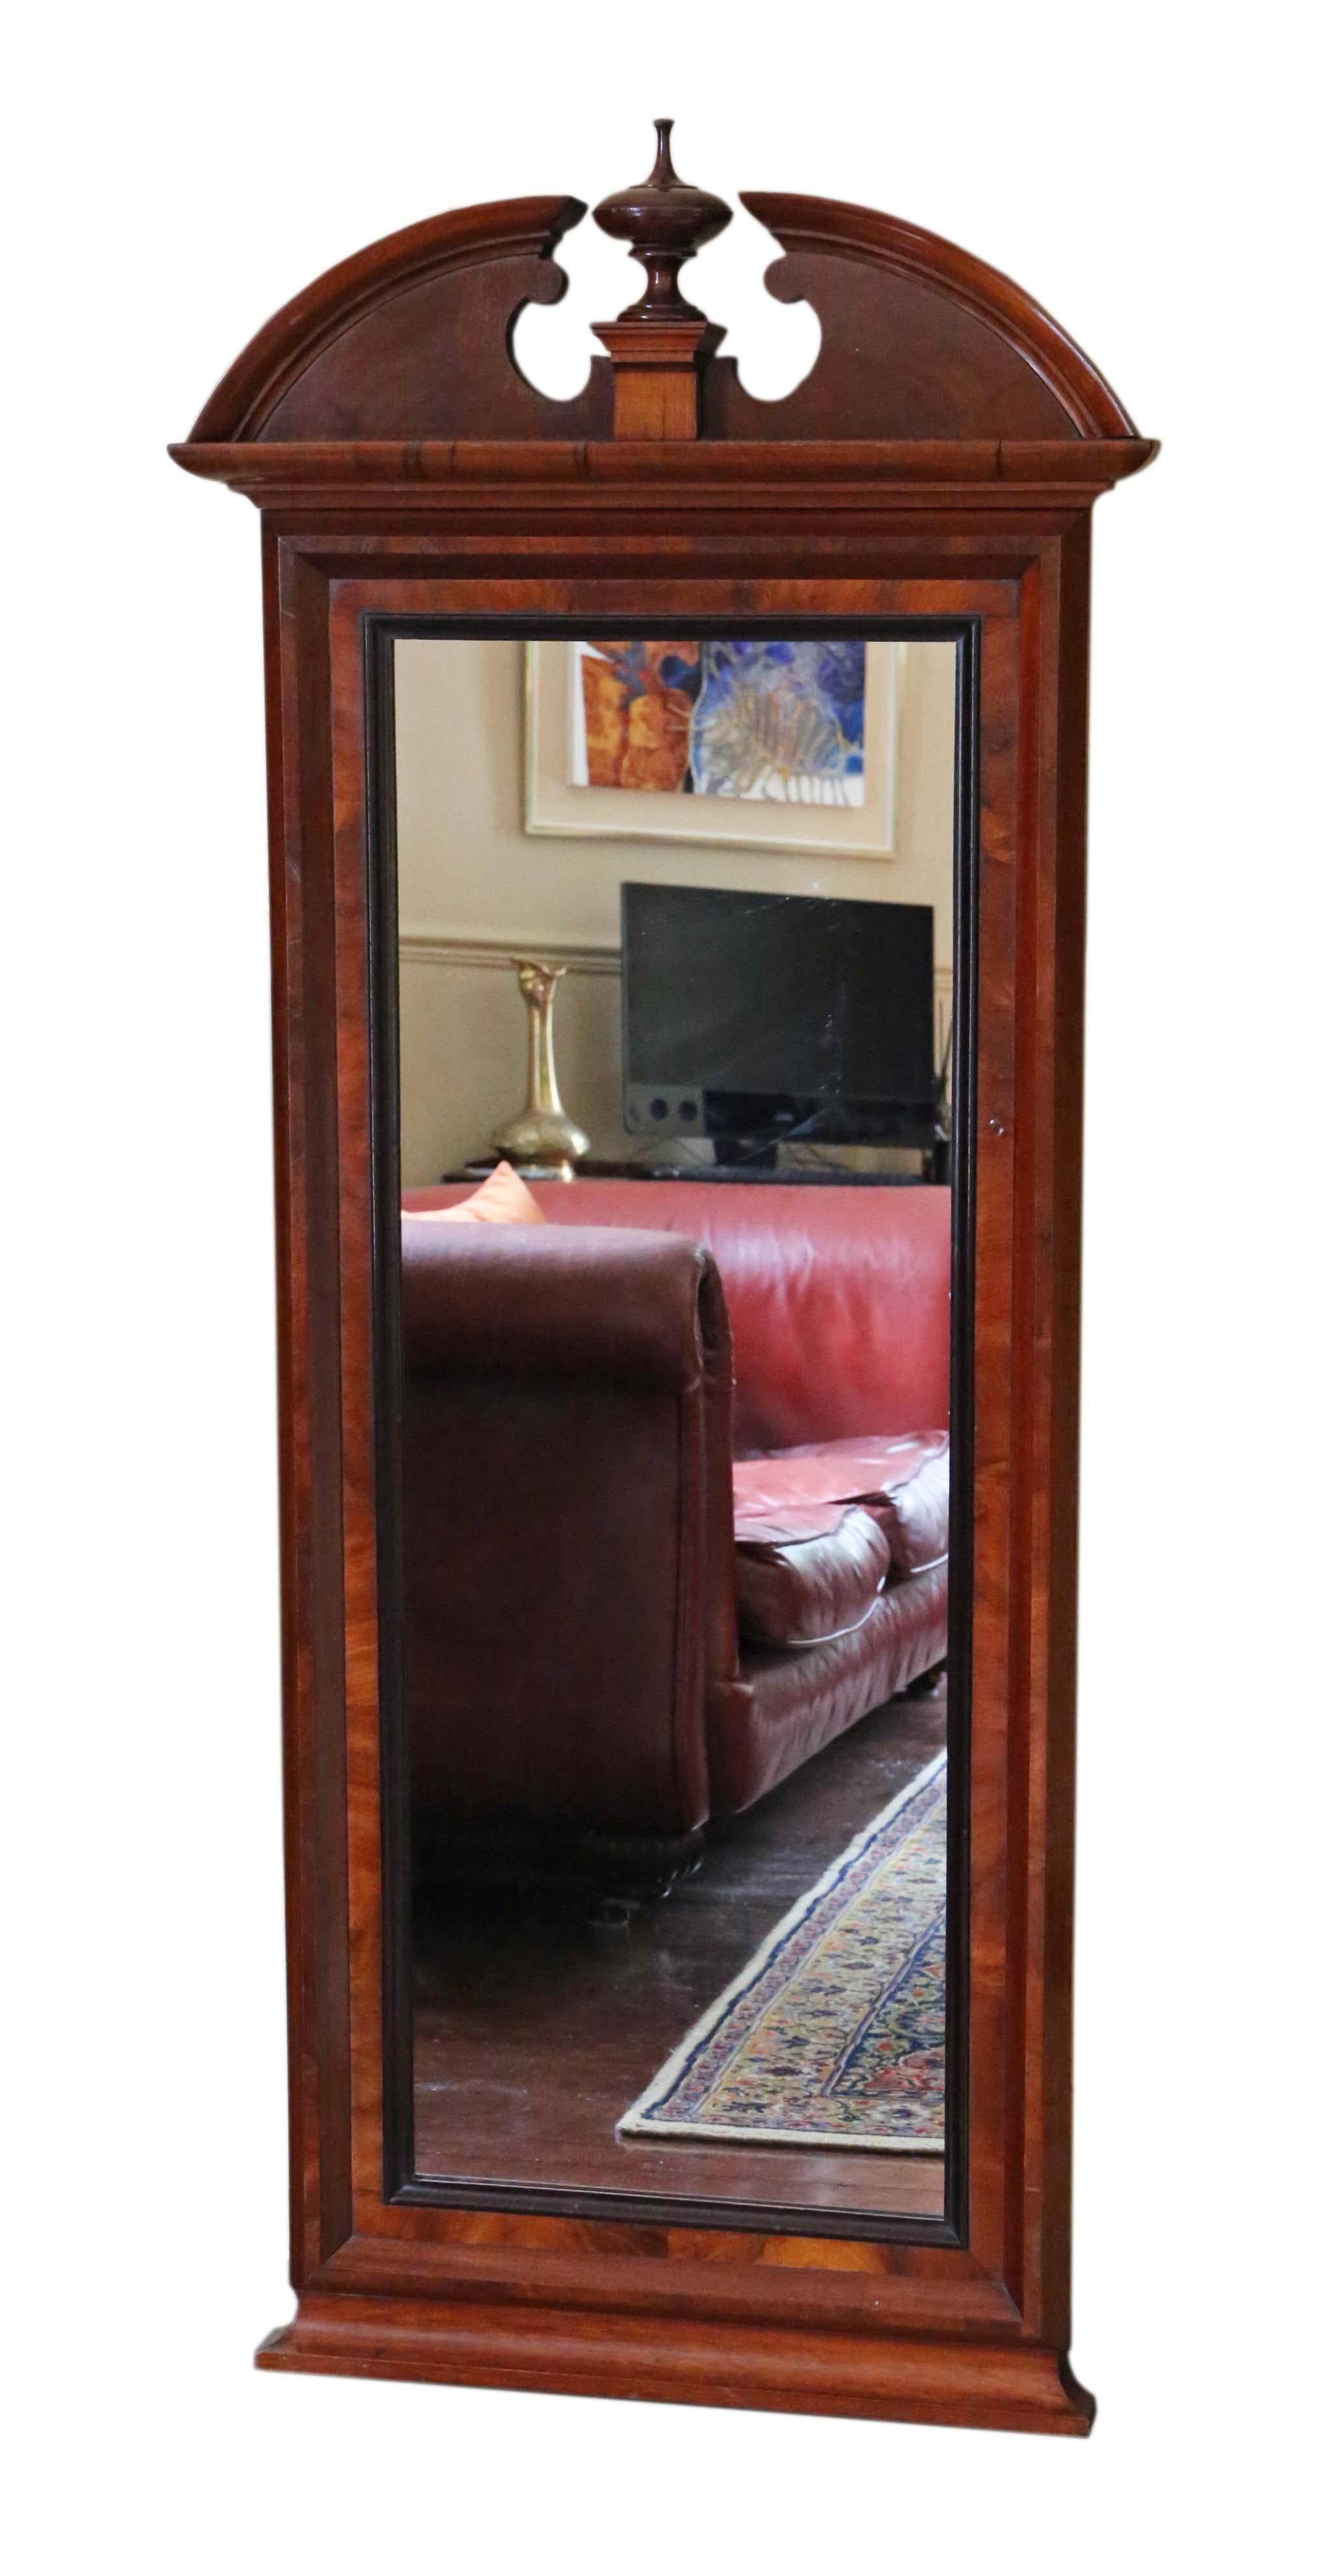 Antique large quality mahogany full height wall mirror, 19th Century. Lovely charm and elegance.

This is a lovely, rare mirror. Great frame in good condition… looks great. Predominantly mahogany veneer on softwood construction.

An impressive